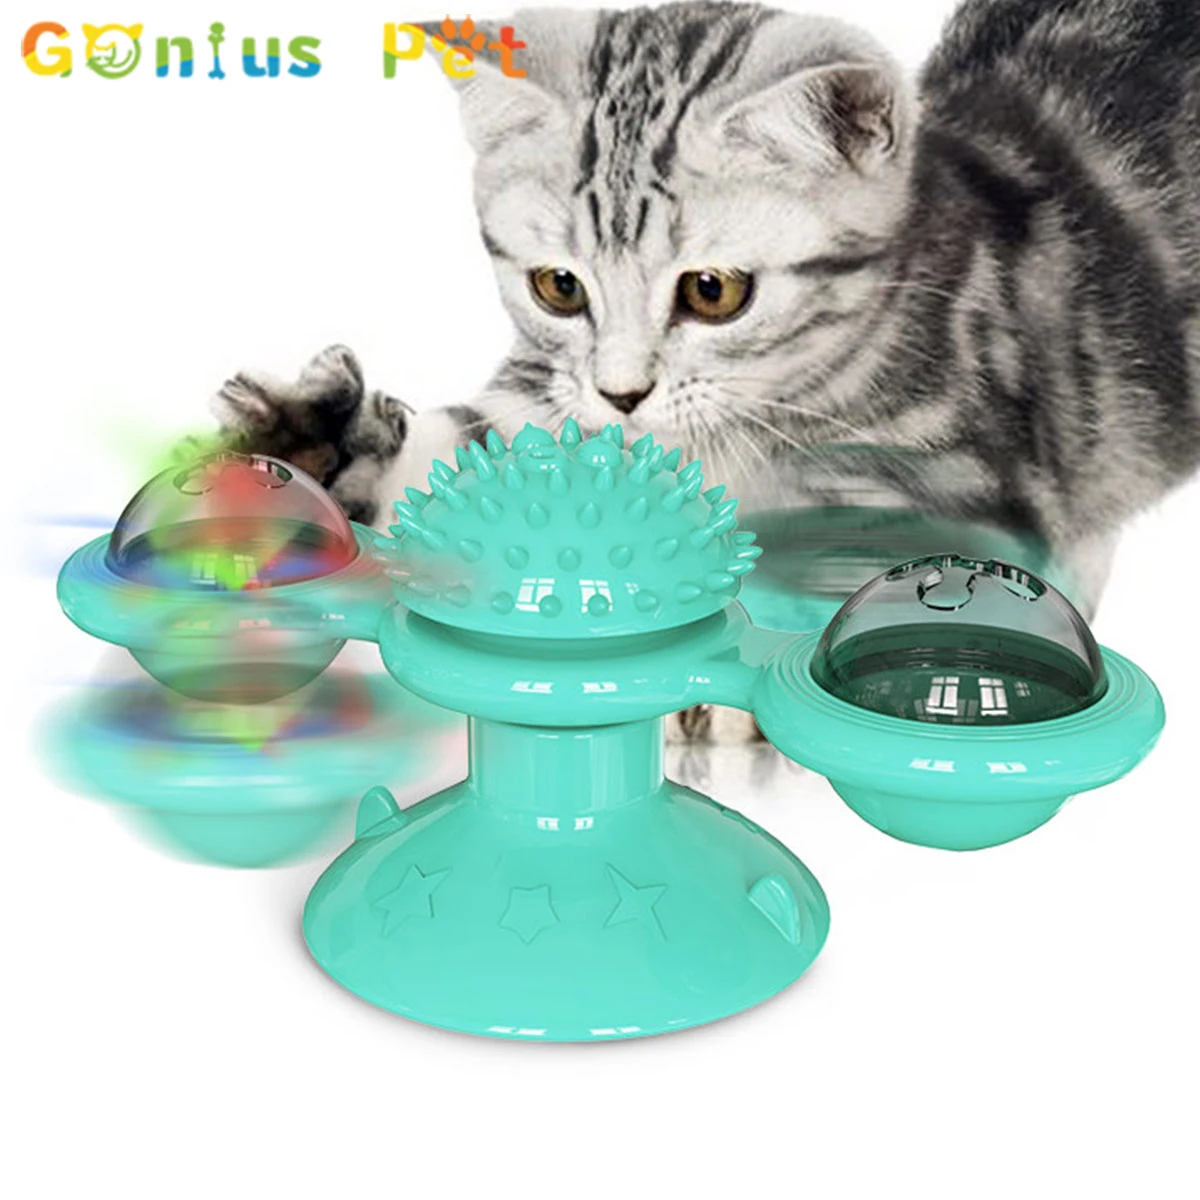 Pet Cat Chew Toy Interactive Cat Scratcher Toothbrush Clean Catnip Fun Play For Cat Accessories Supplies DropShipping Gonius Pet